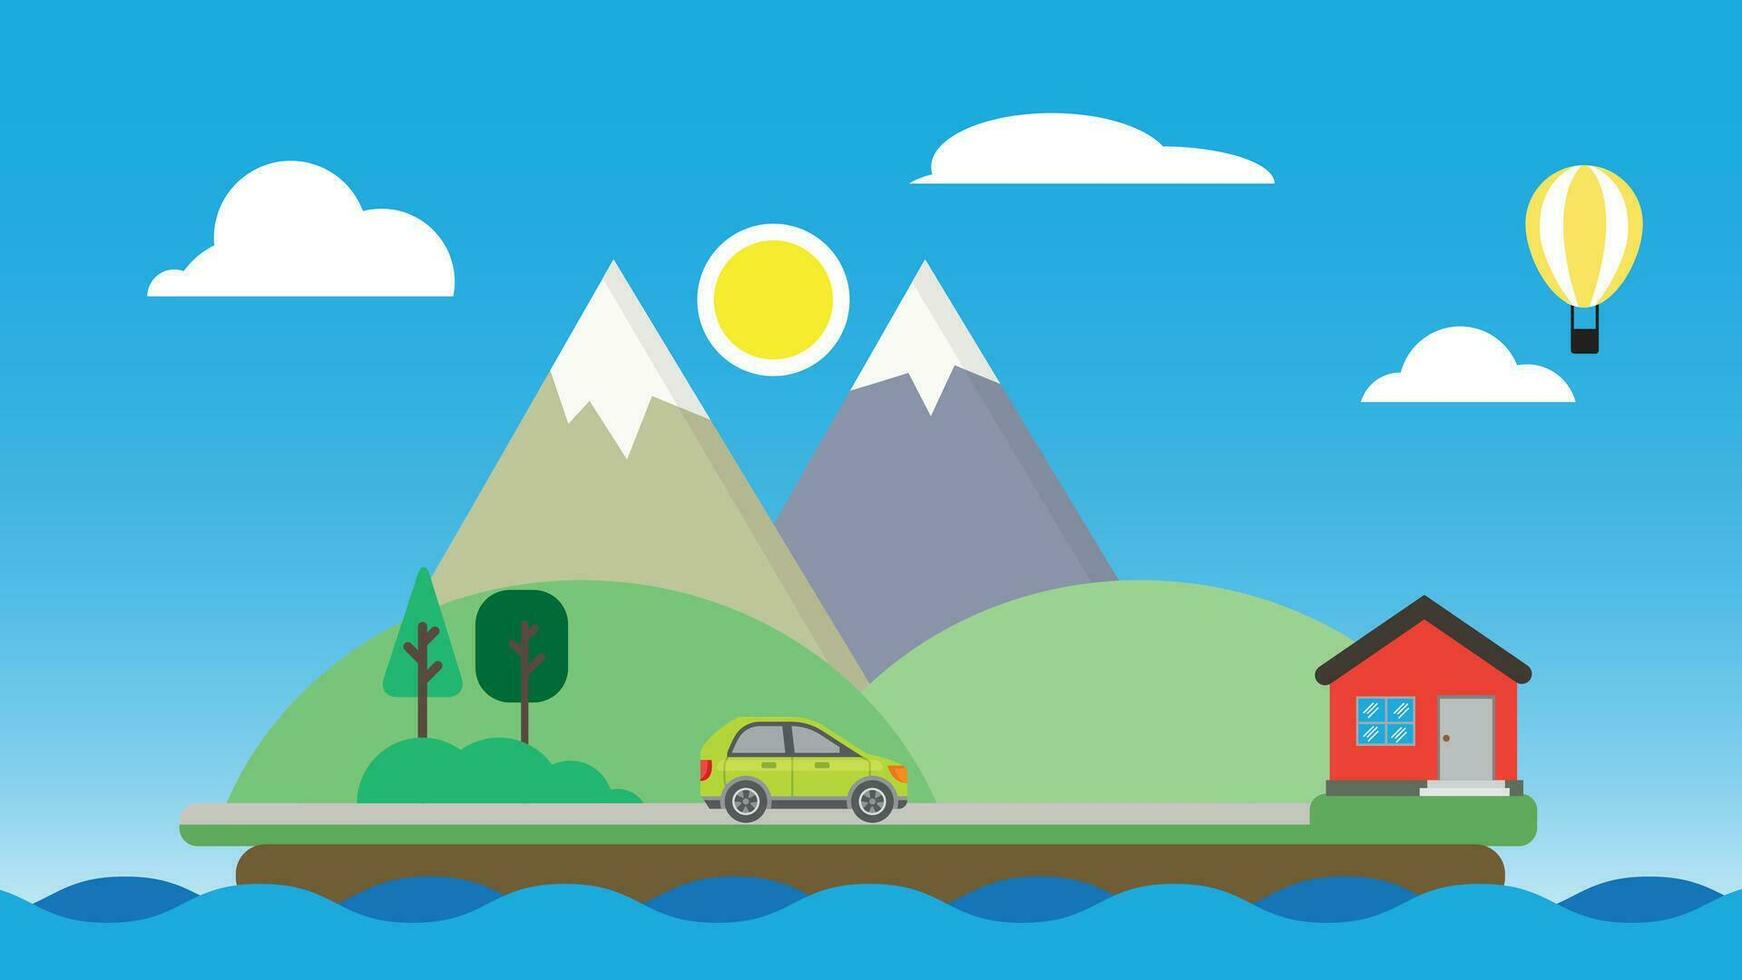 Scenery design is suitable for animated backgrounds, animated mountain backgrounds vector